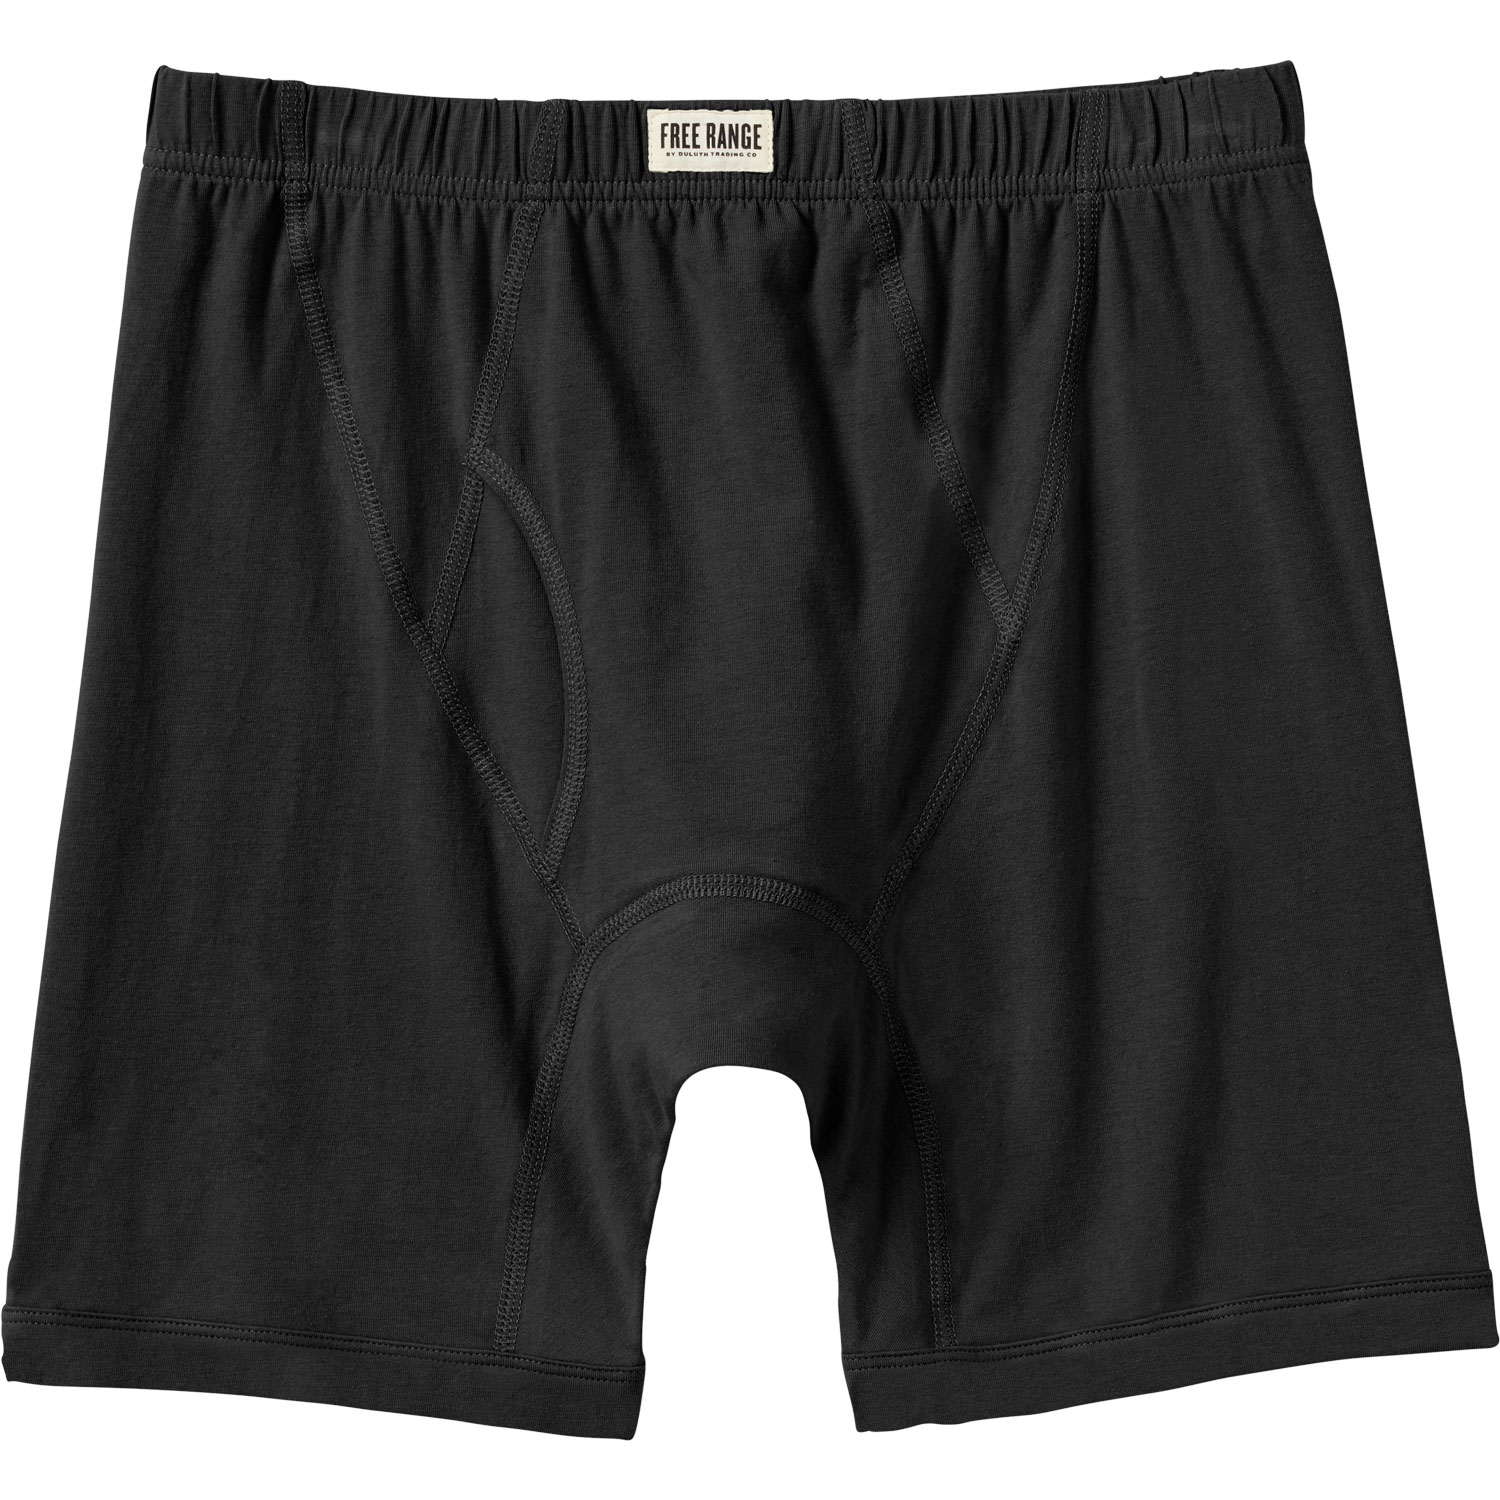 100% Organic Cotton Mens Boxer Brief Underwear PURE and SOFT chemical-free  cotton XLarge 